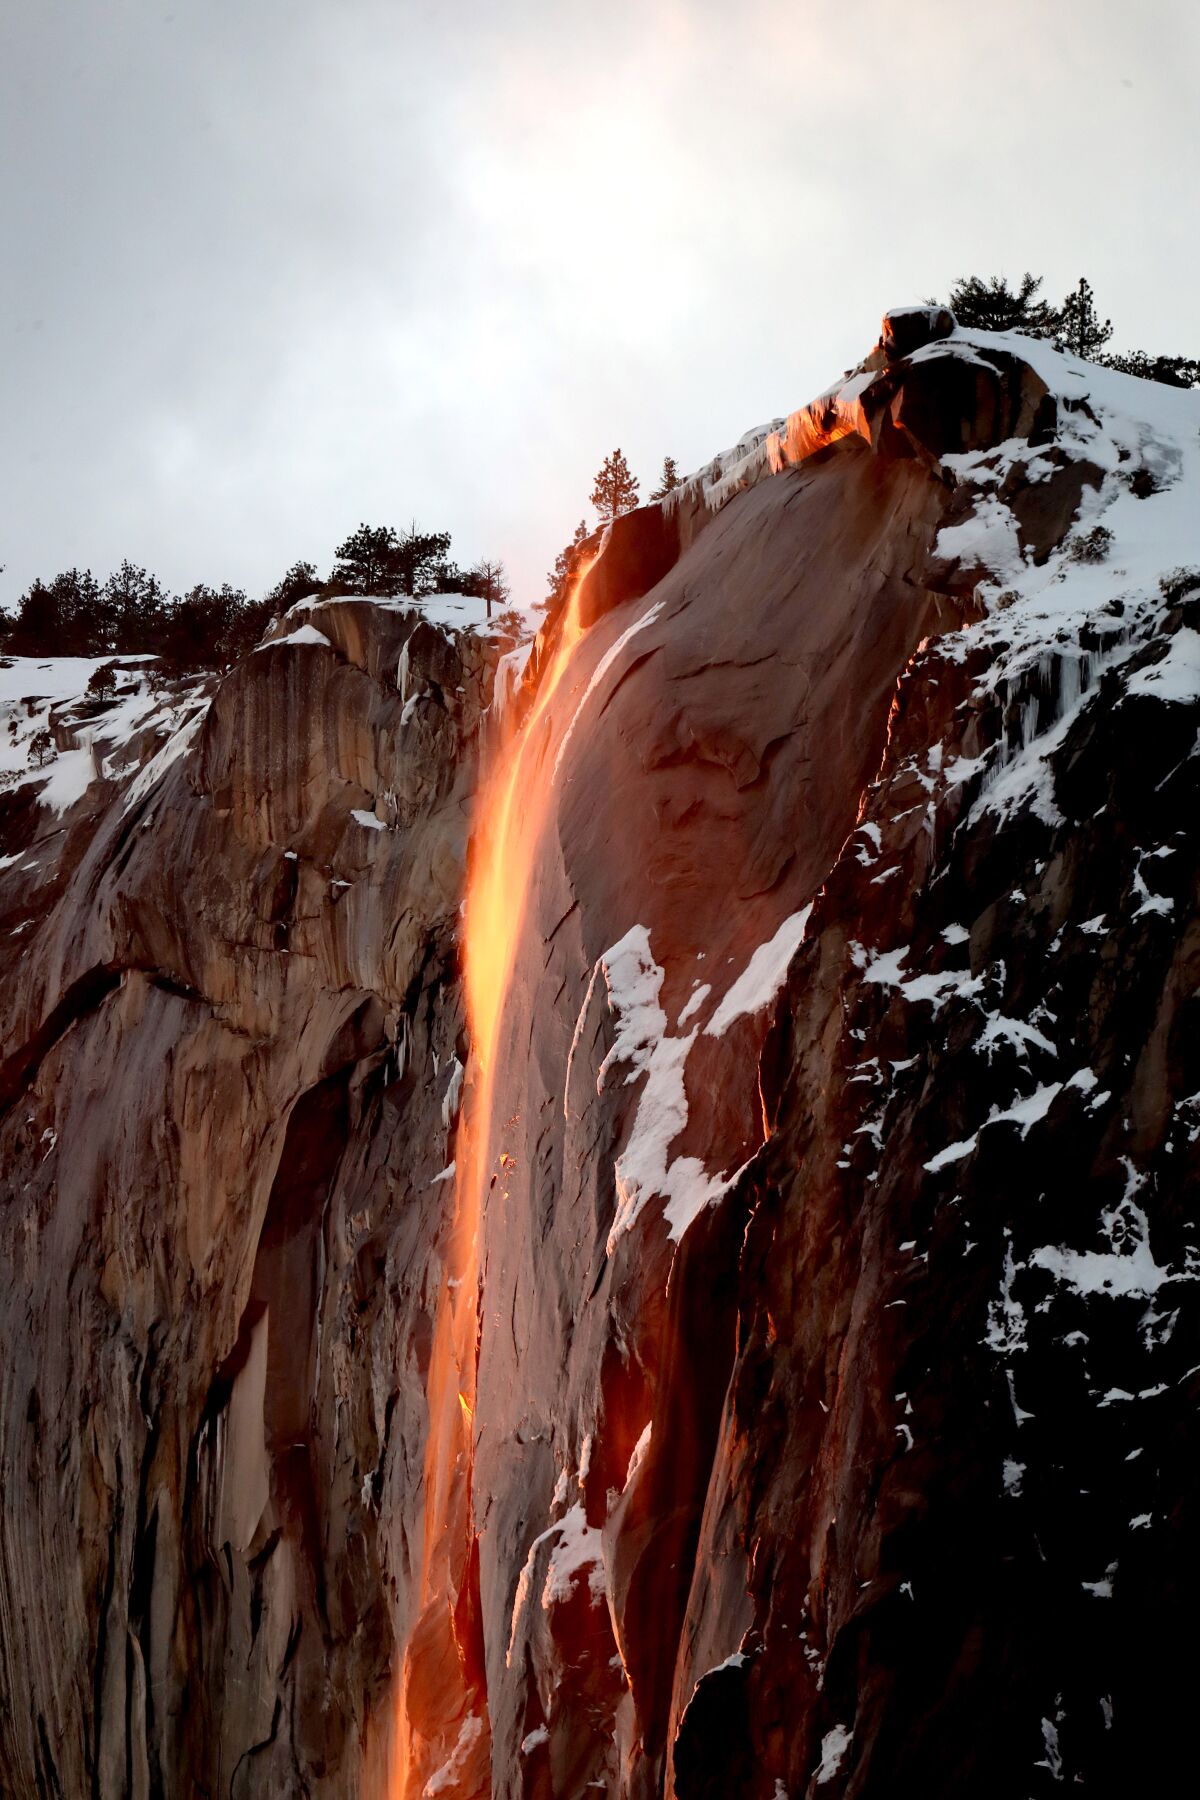 Raul Roa shot this close-up of Horsetail Fall in Yosemite last year. He suggests bringing a camera with zoom lenses.